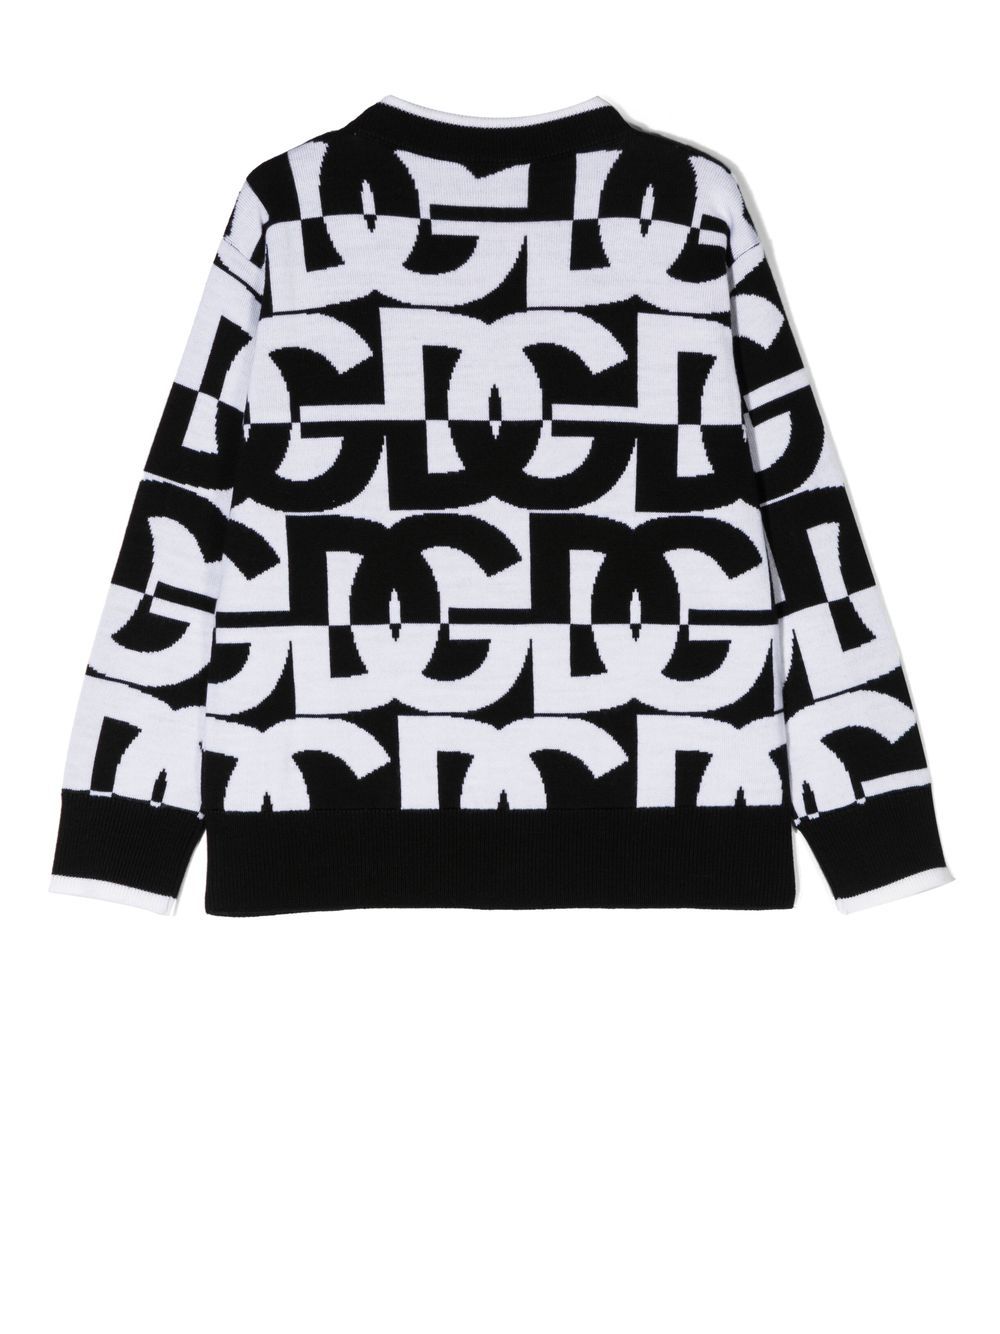 Black and white sweater for children with logo